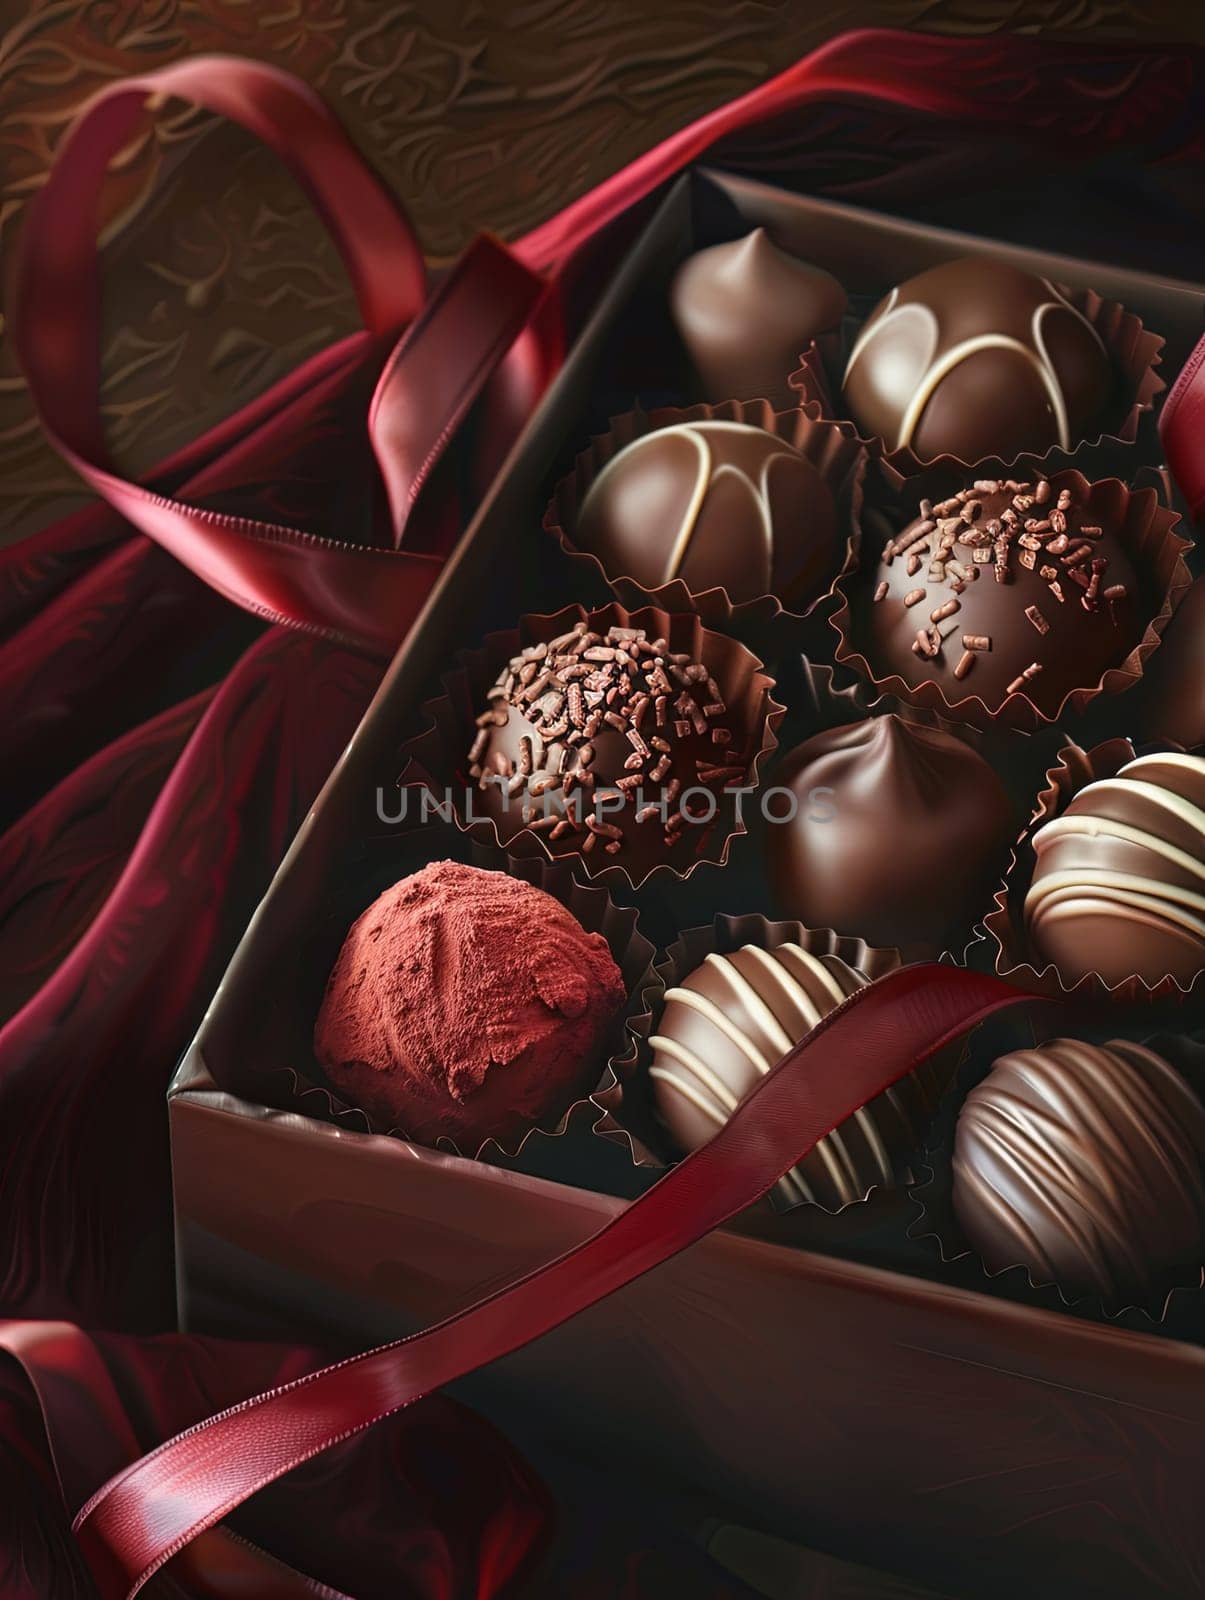 A luxurious box of chocolate truffles adorned with a vibrant red ribbon, showcasing rich dark colors and high attention to detail.